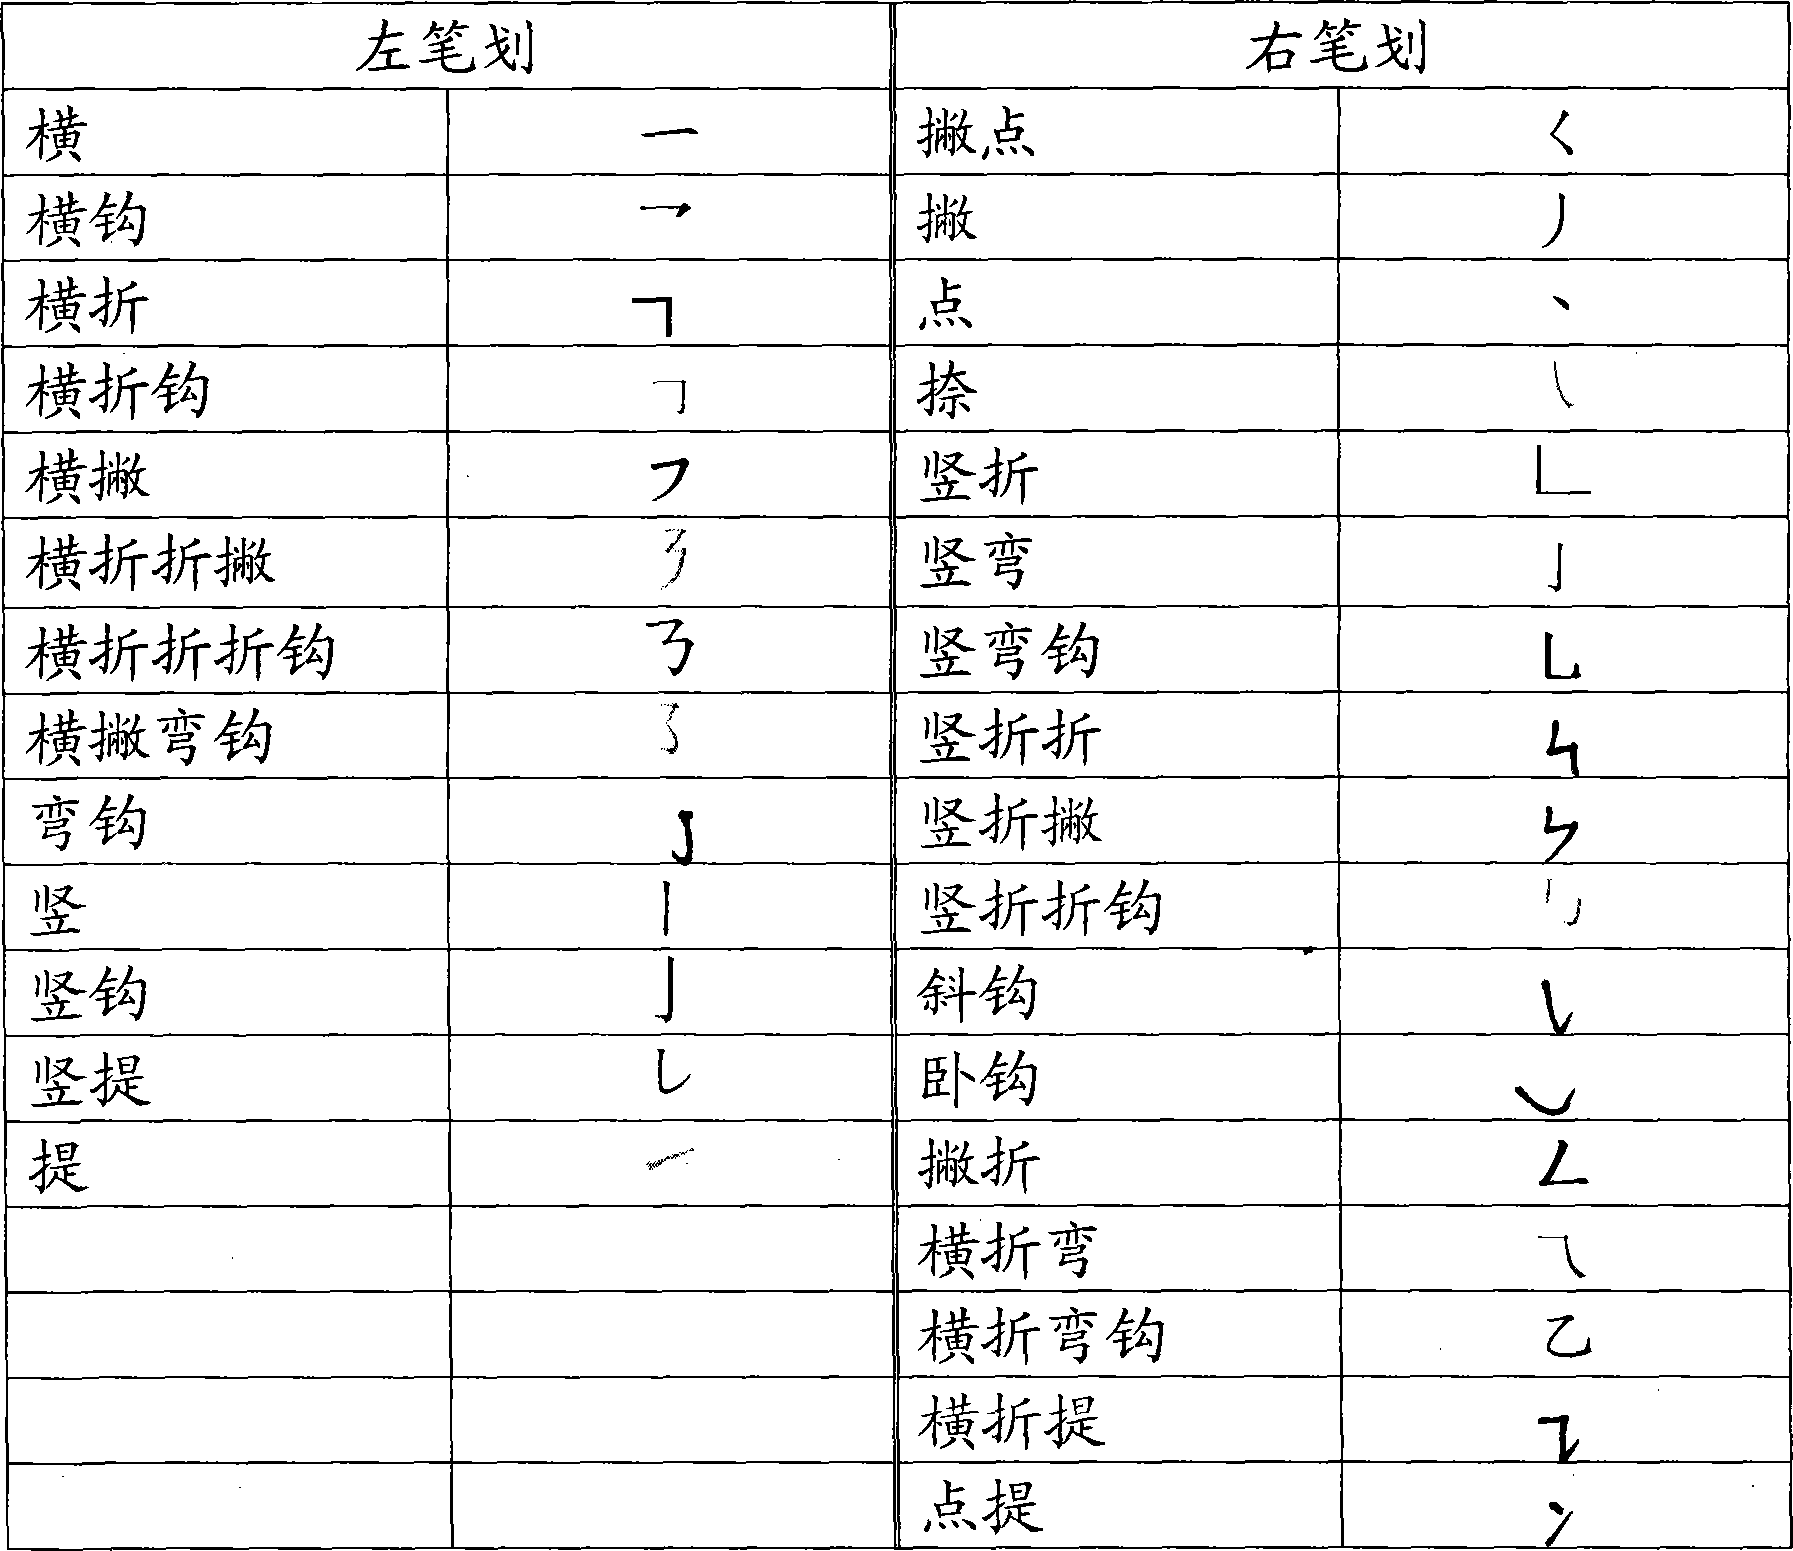 Chinese characters pen number-shape-number-symbol input method